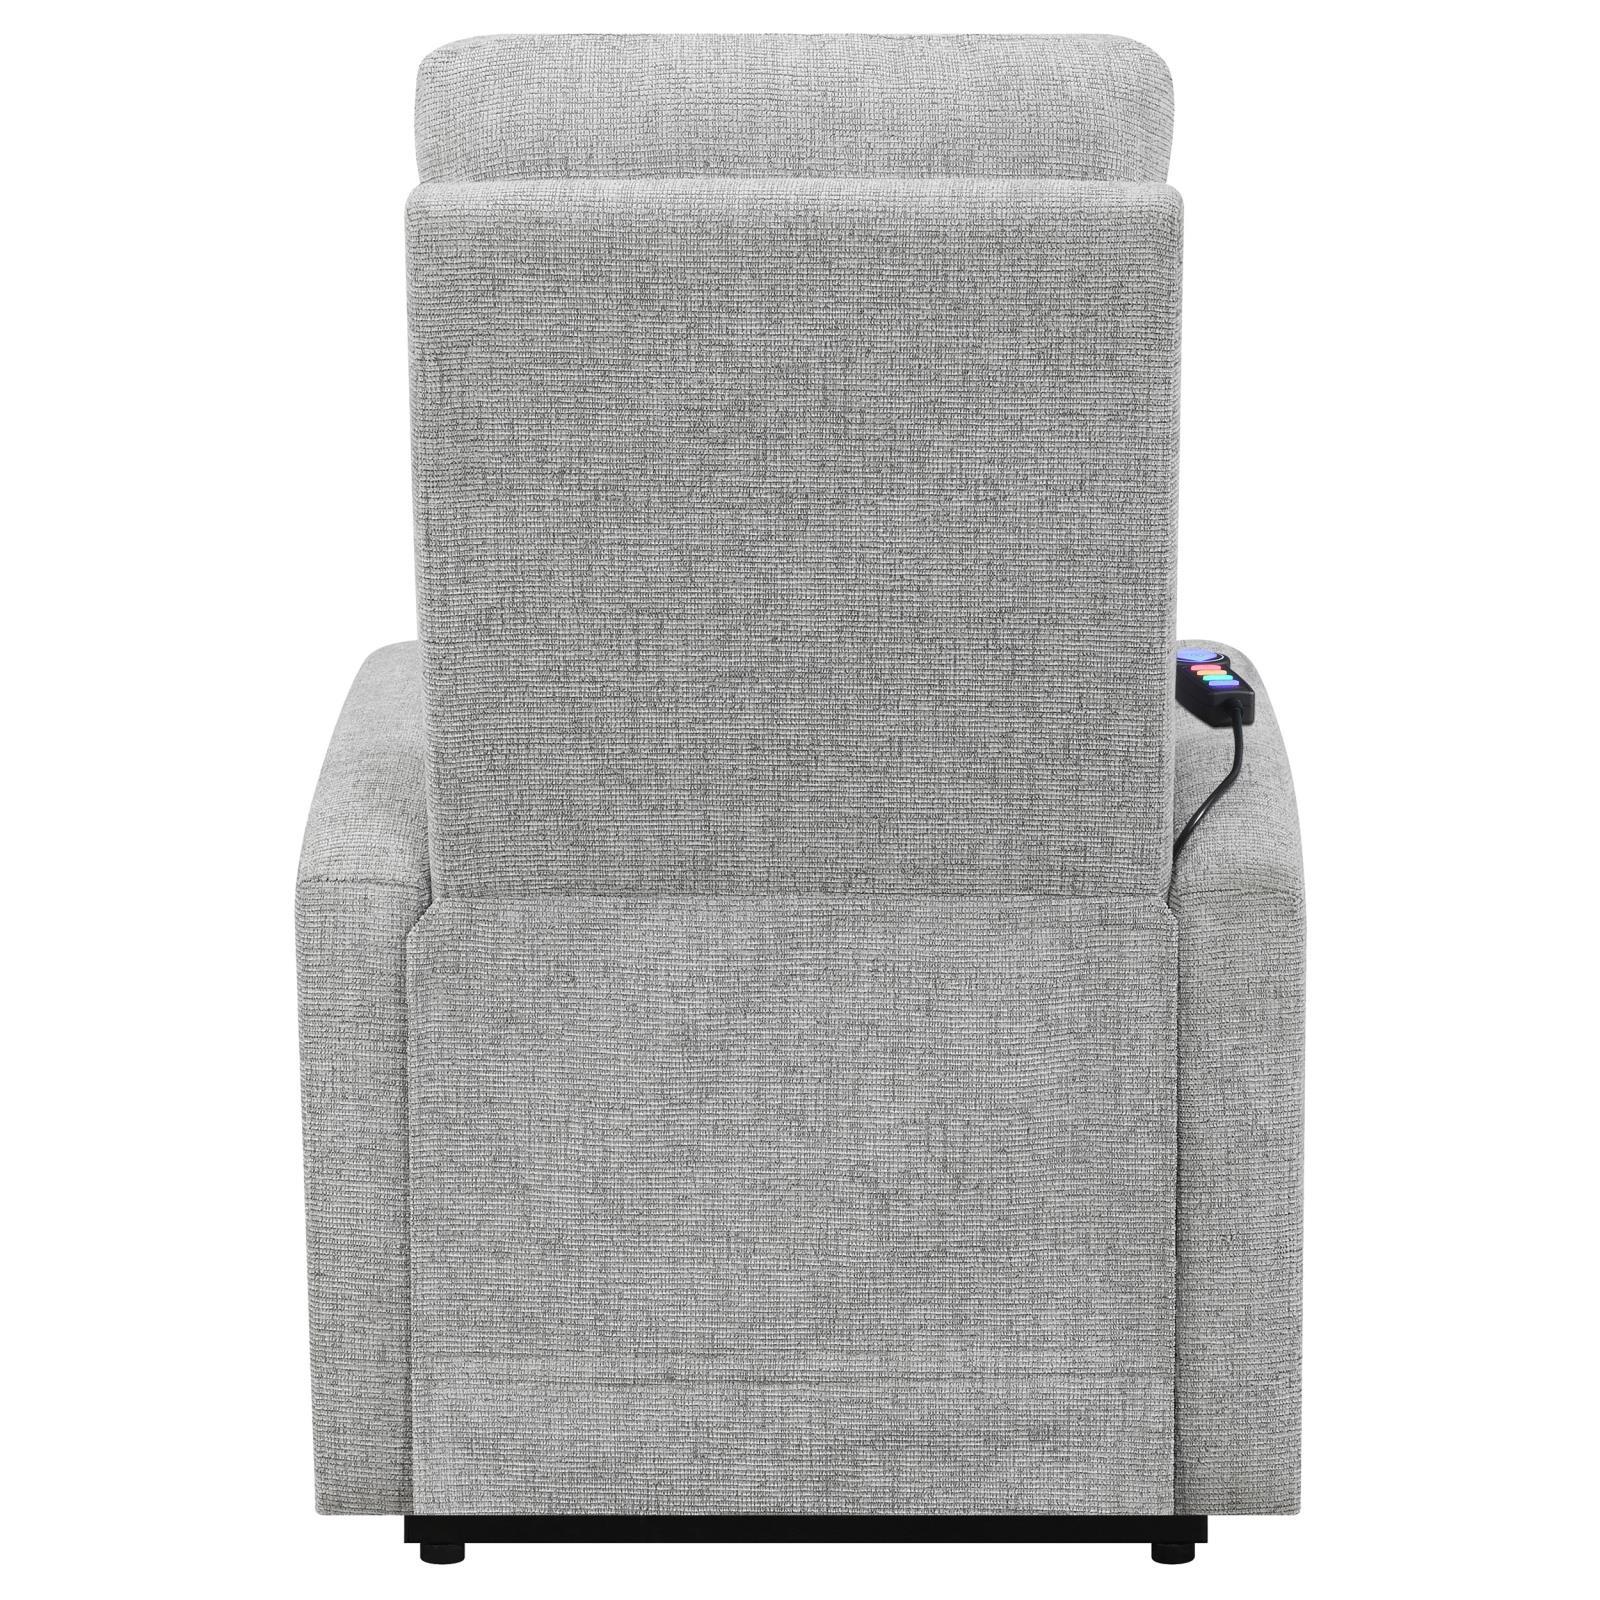 Howie Tufted Upholstered Power Lift Recliner Grey Howie Tufted Upholstered Power Lift Recliner Grey Half Price Furniture